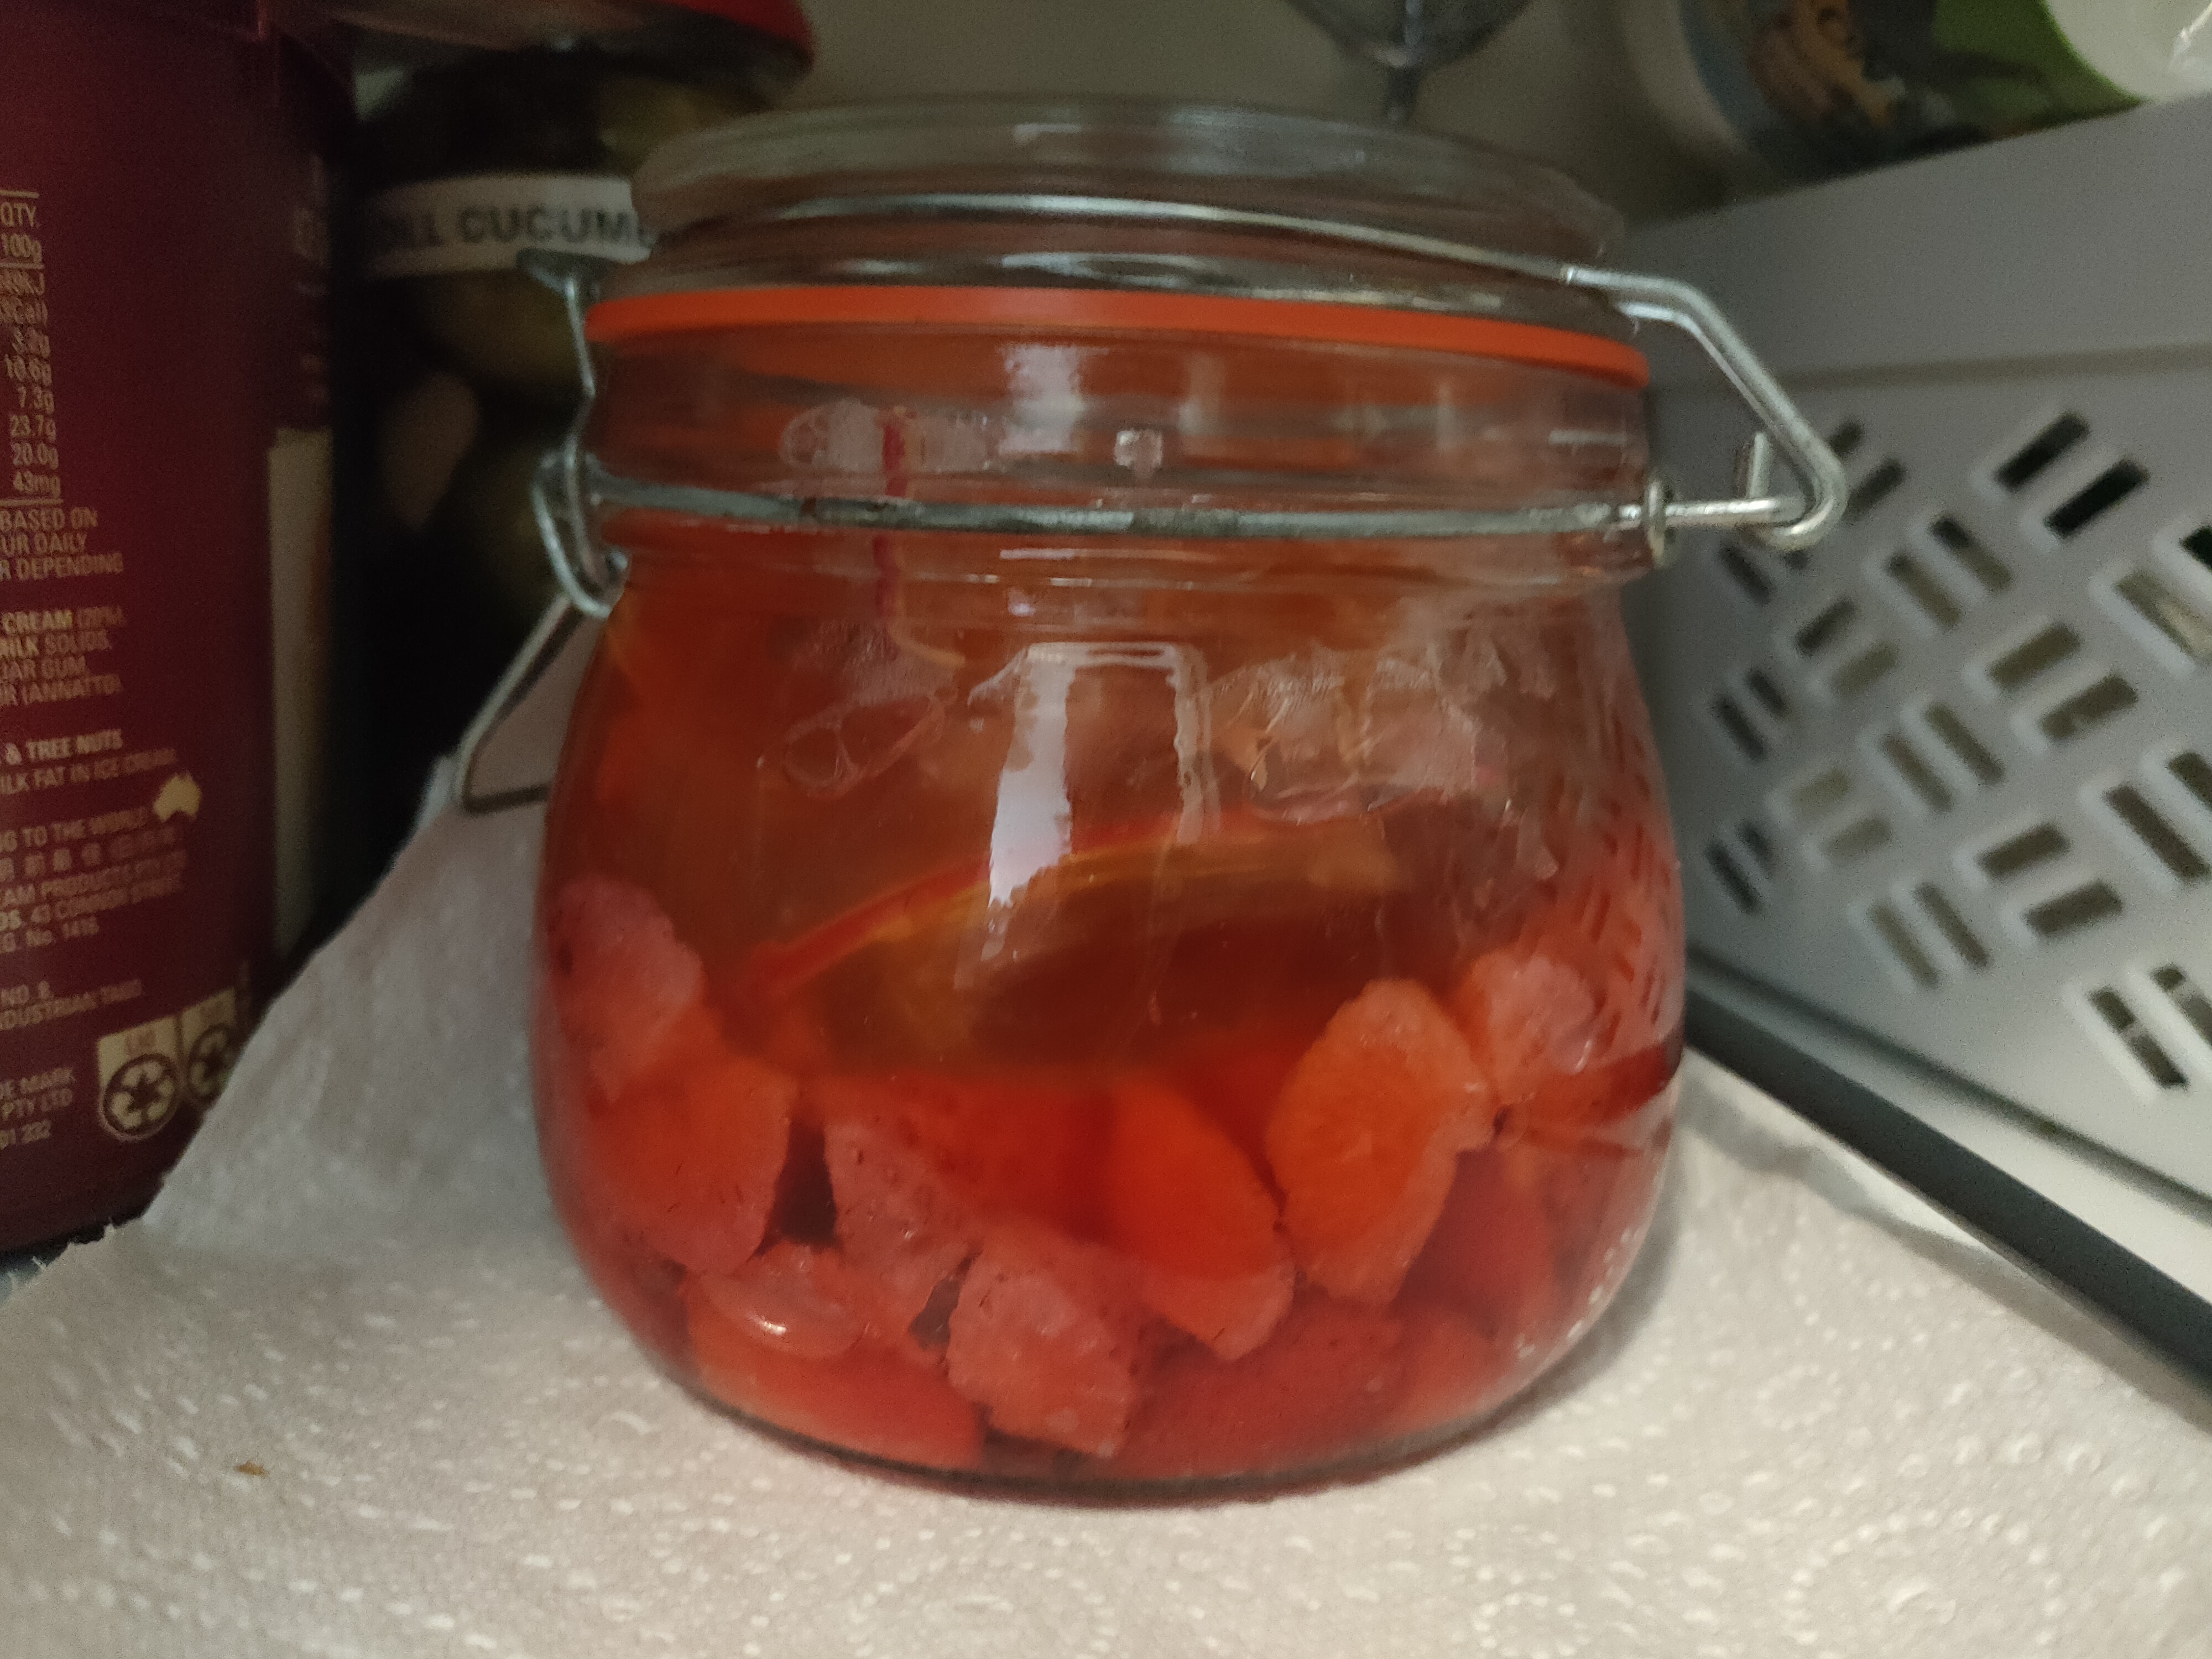 Chopped strawberries in a jar on day 2